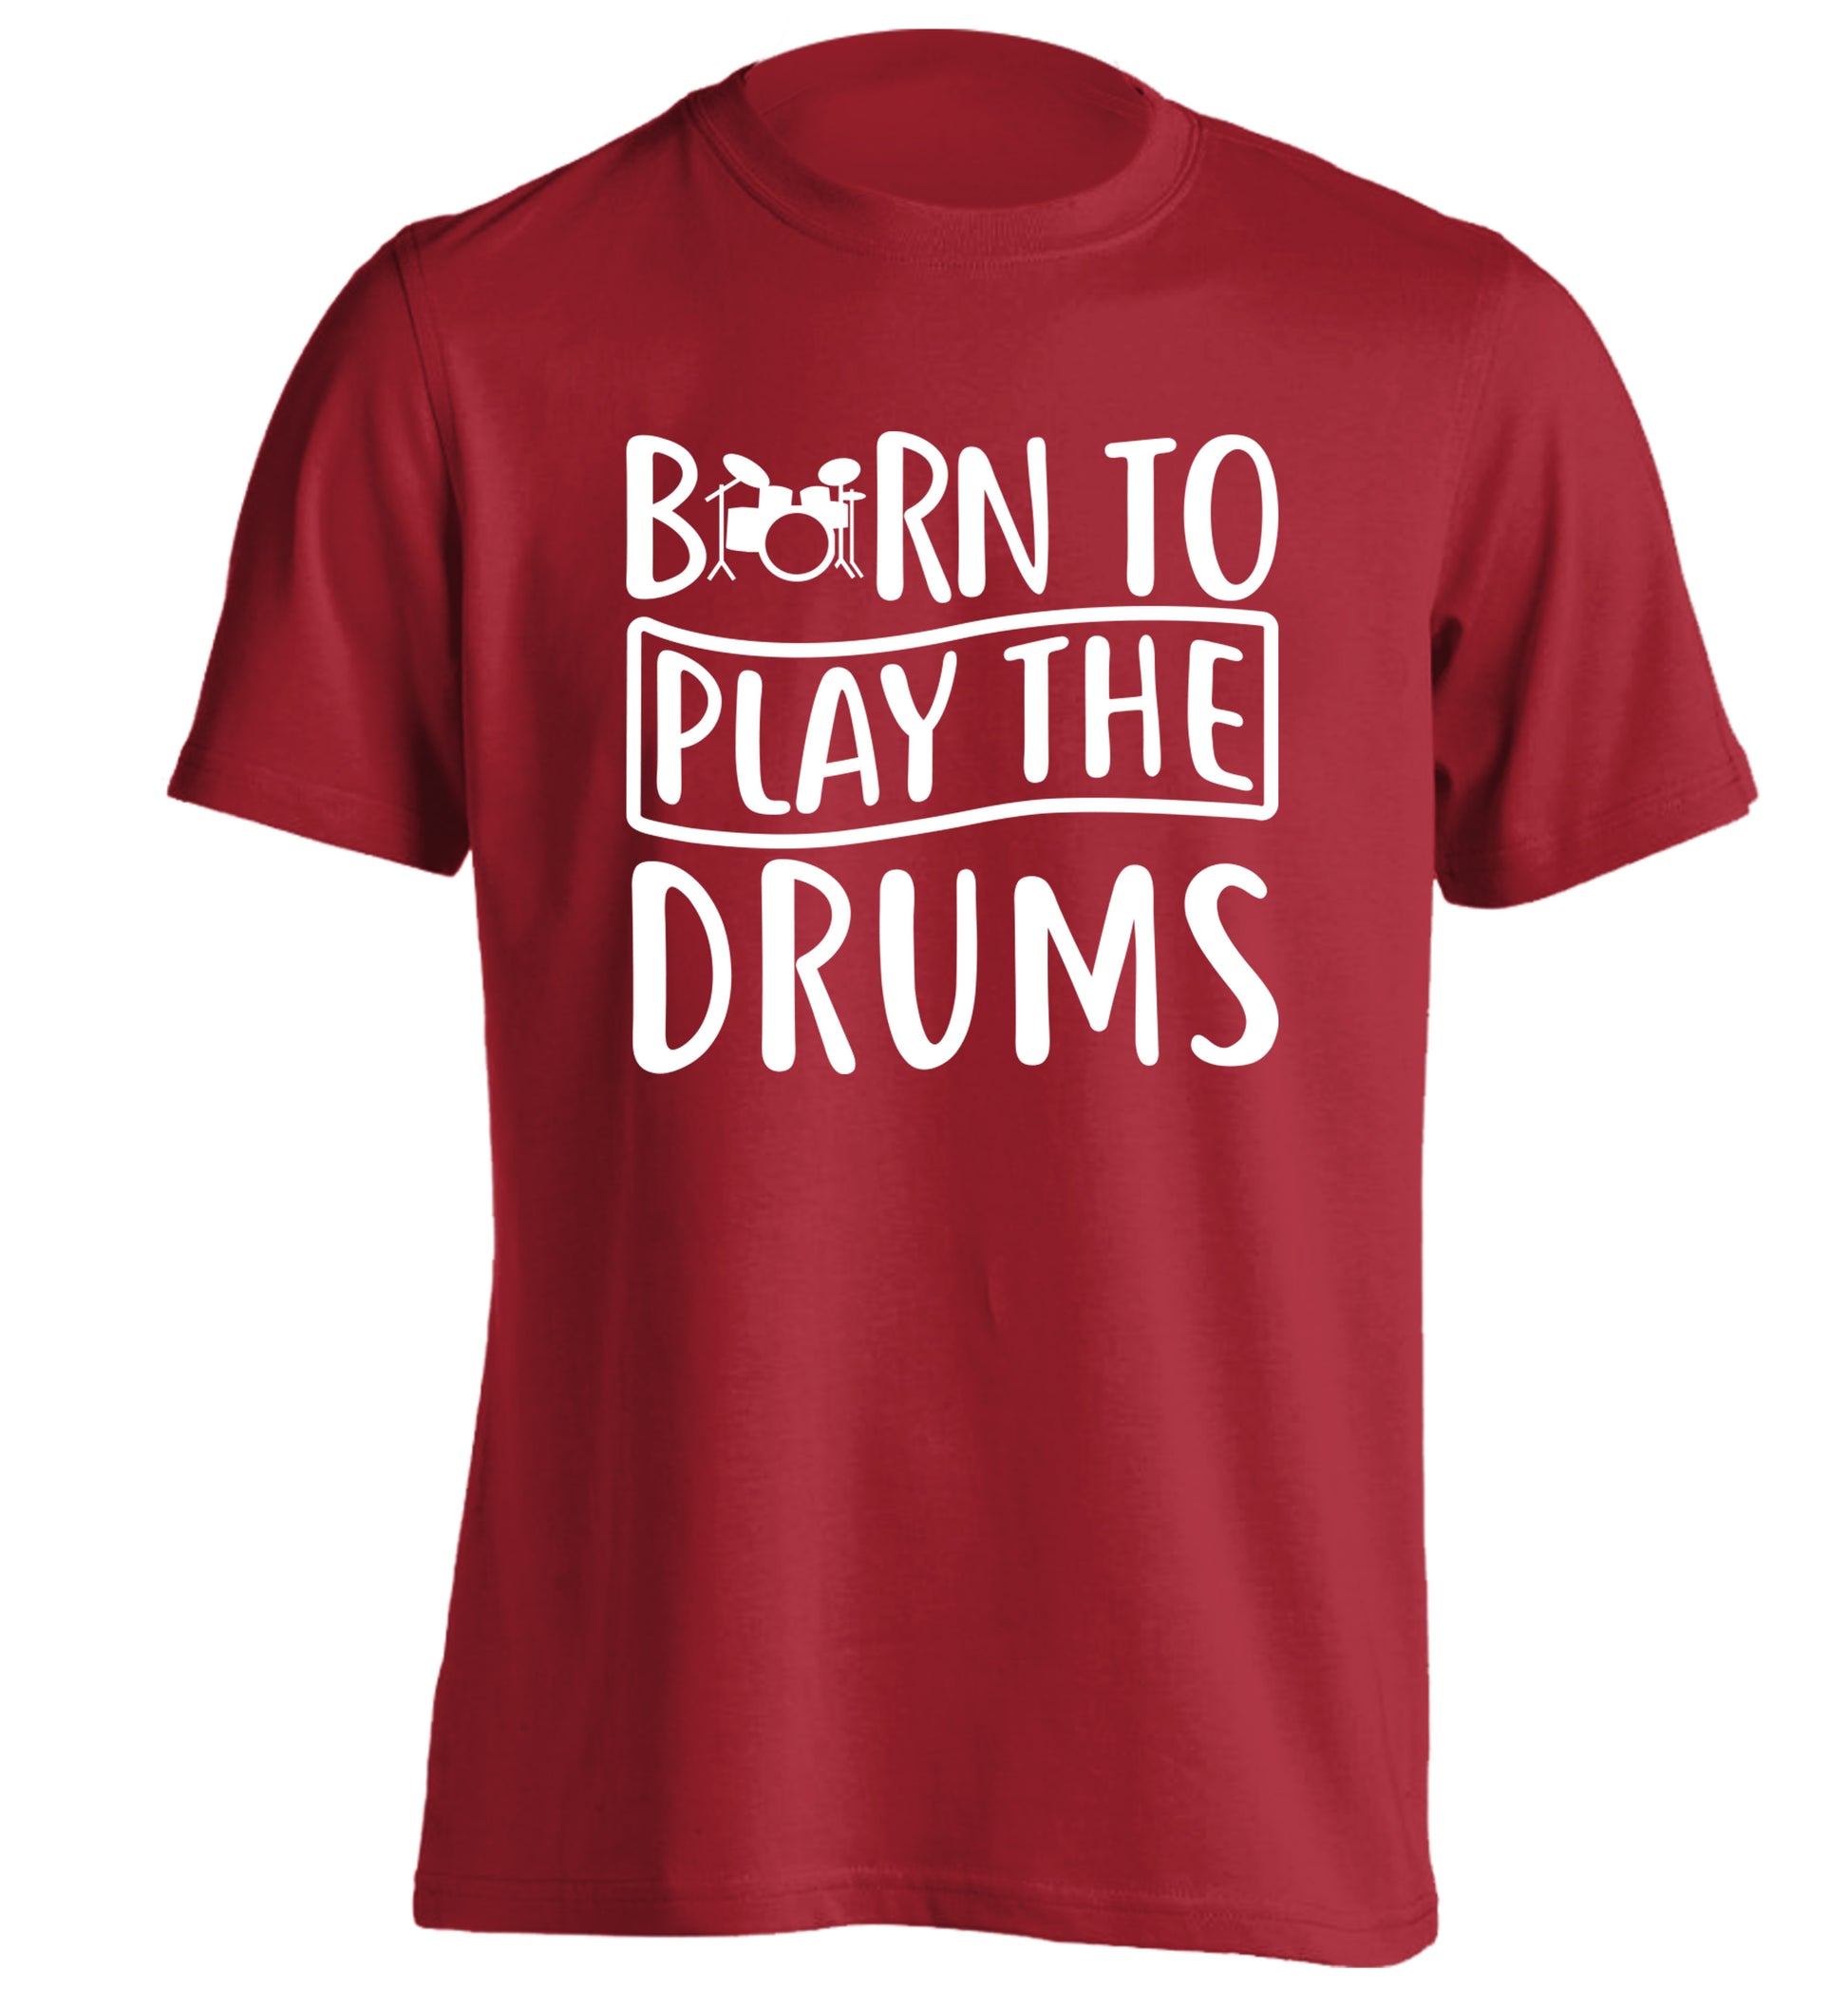 Born to play the drums adults unisex red Tshirt 2XL